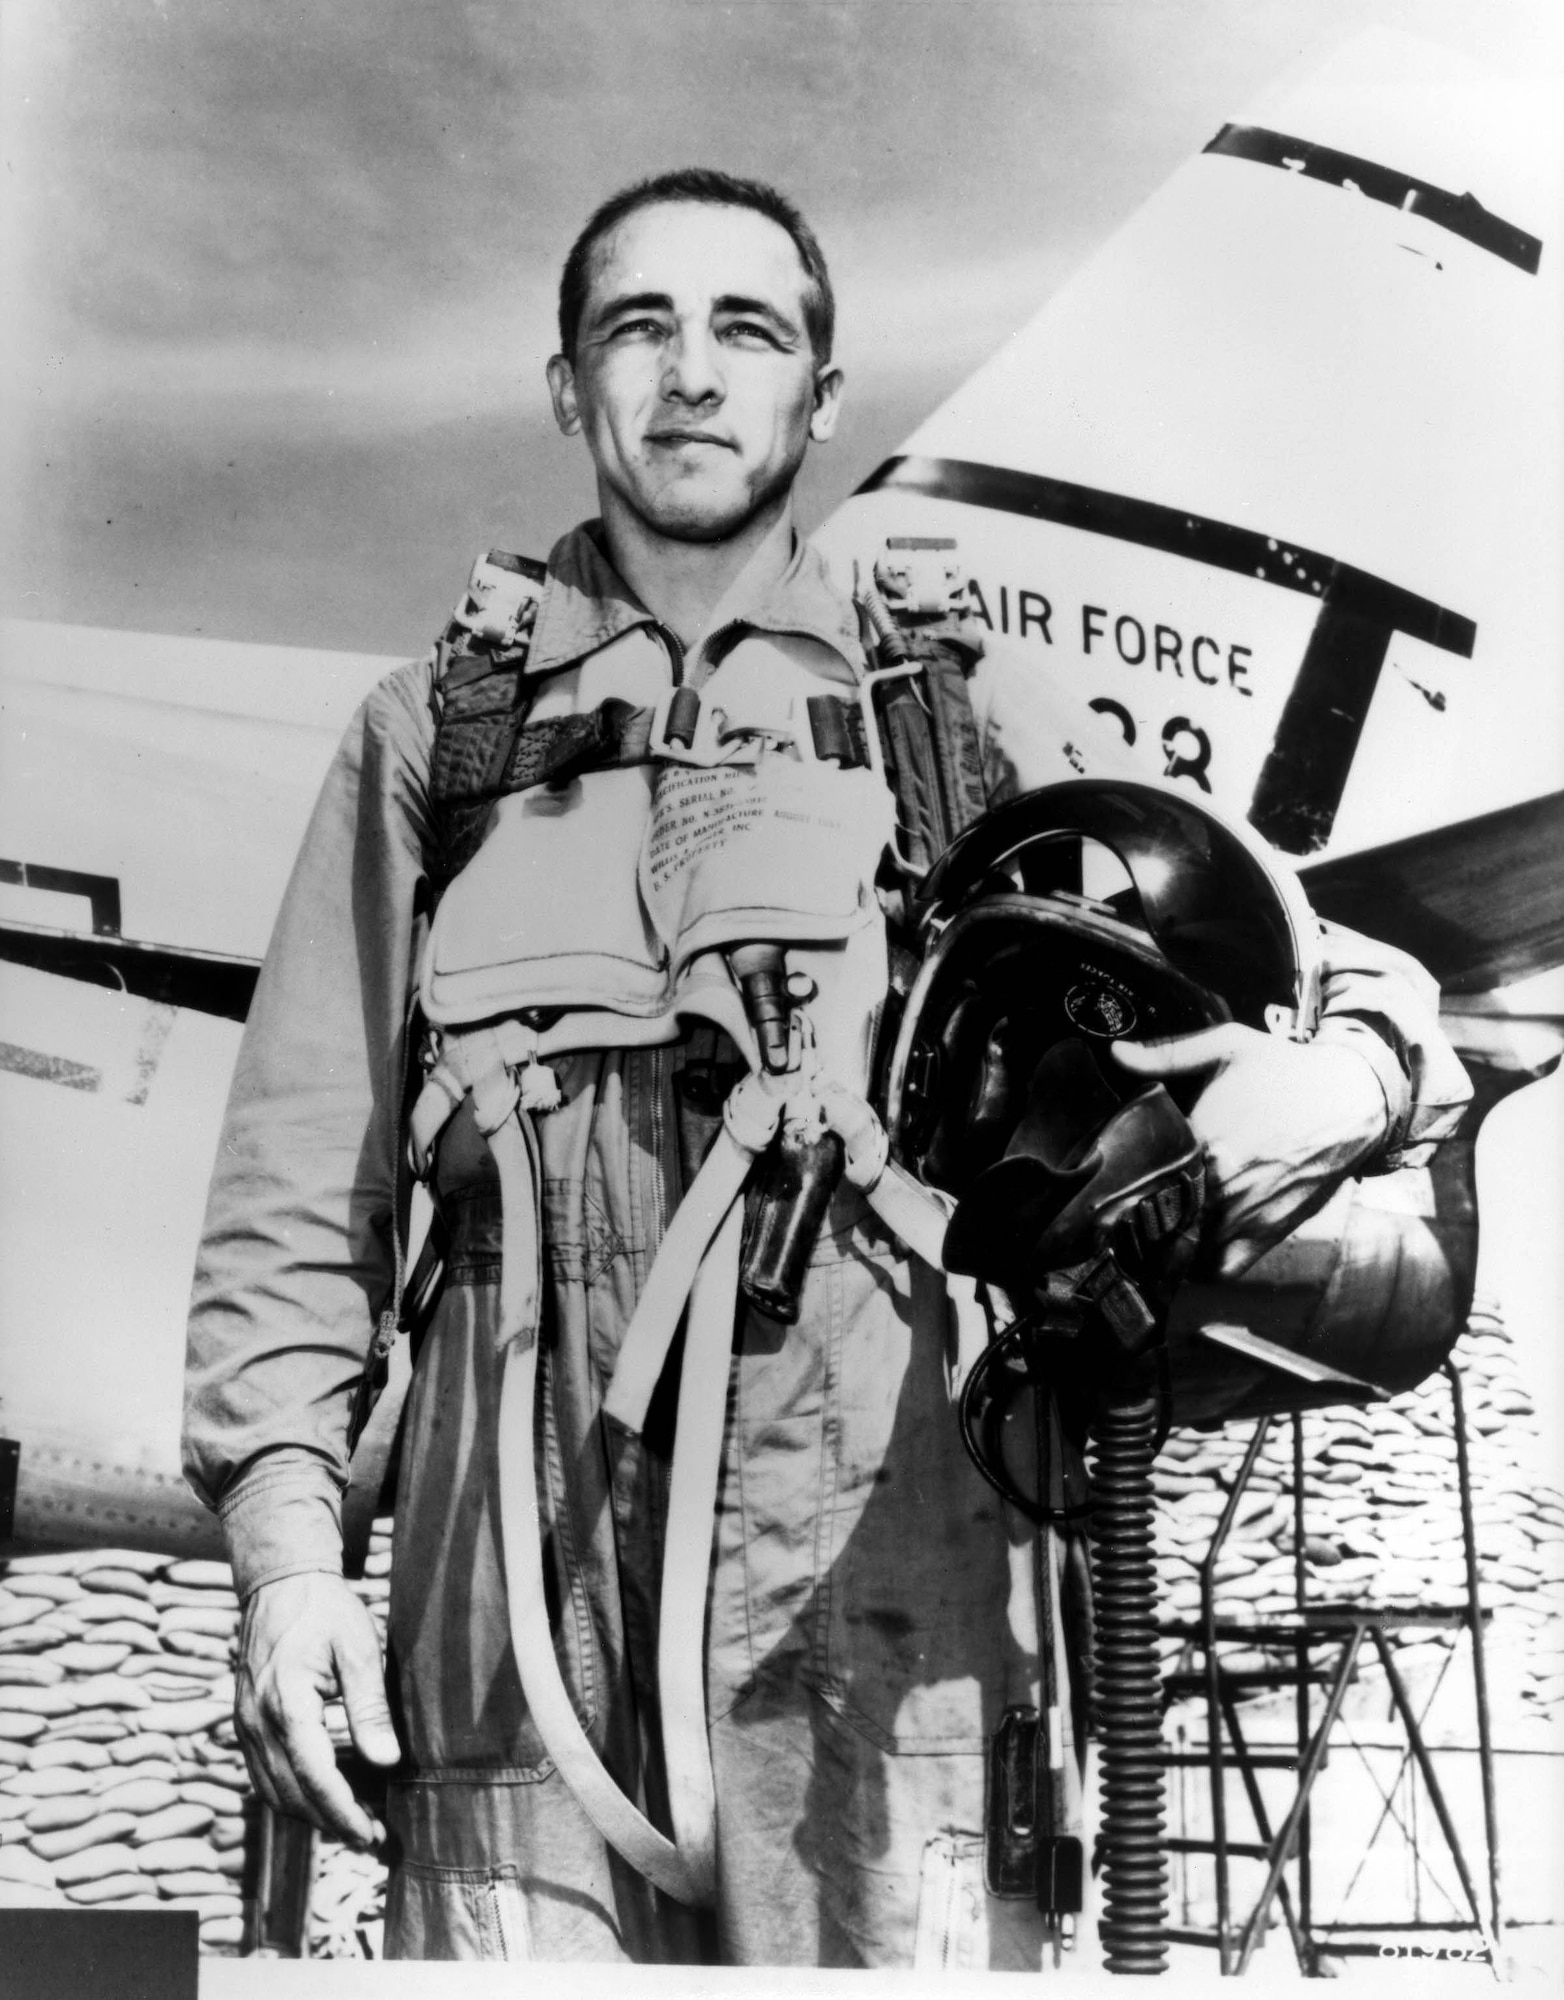 Brig. Gen. James Robinson “Robbie” Risner is credited with destroying eight MiG-15s and damaging another while assigned to the 336 Fighter Squadron in South Korea. On Sept. 21, 1952, then-Major Risner scored double kills.  He achieved ace status on Sept. 15, 1952, downing his fifth MiG-15. 